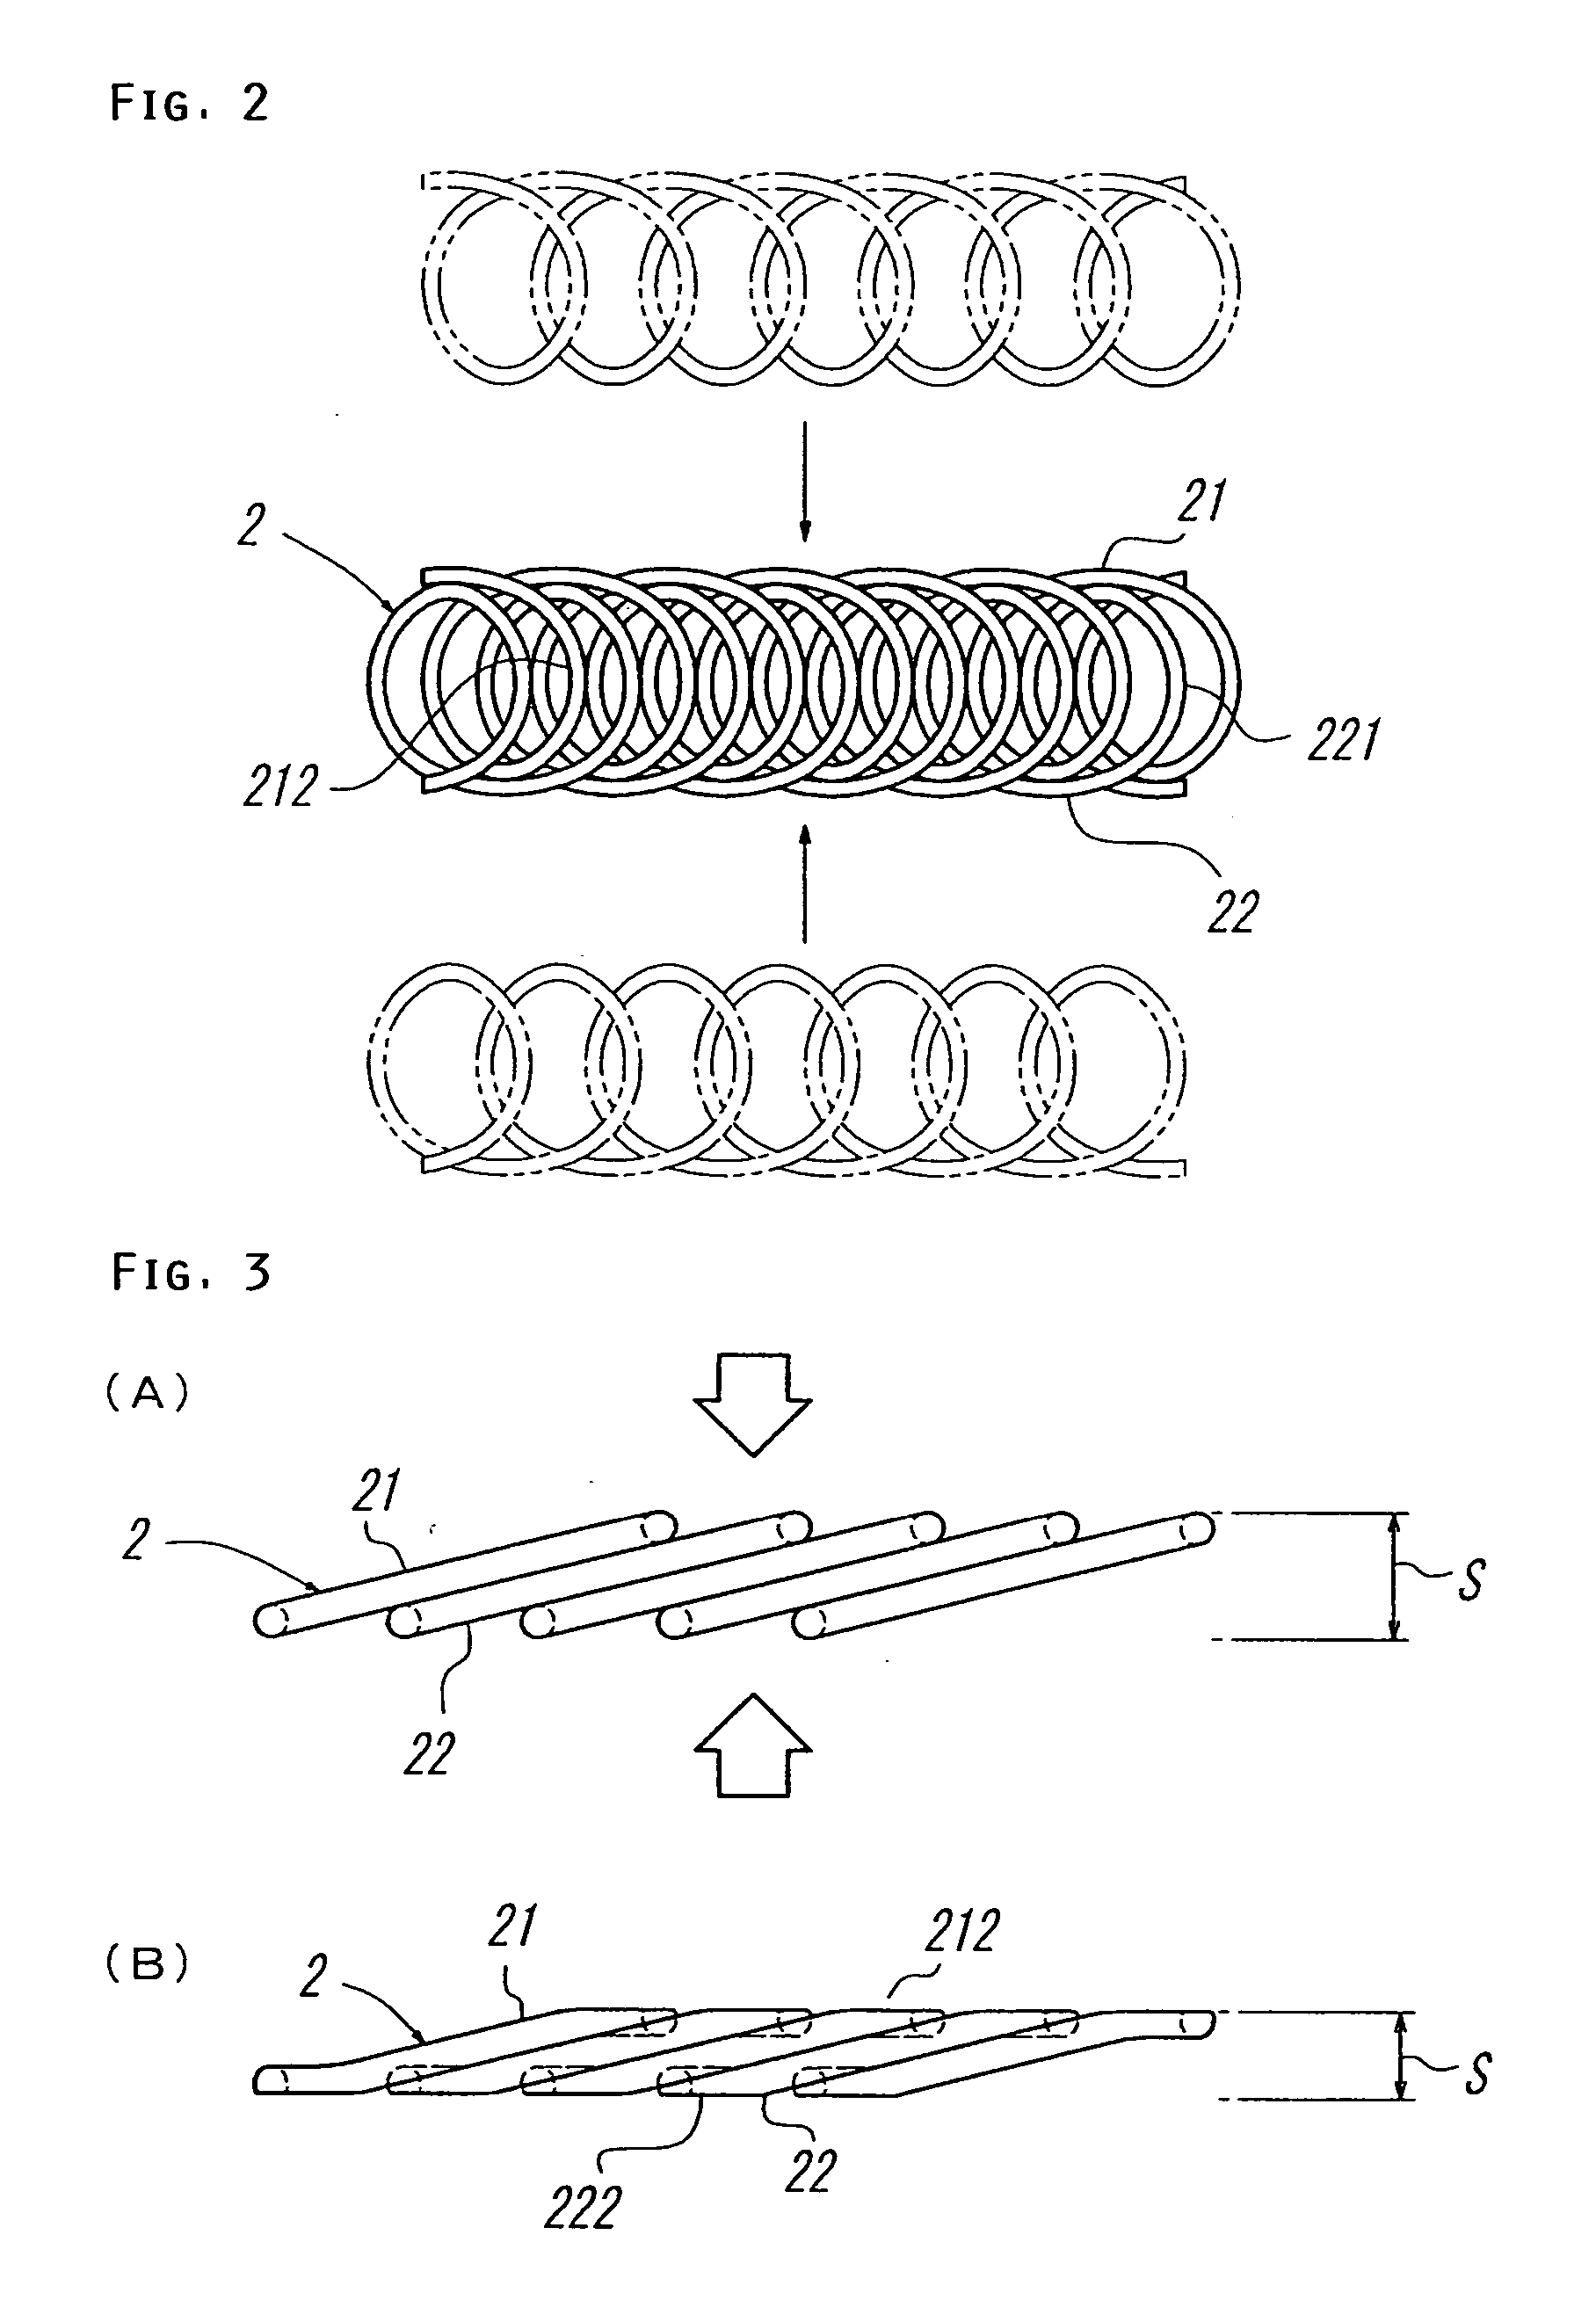 Method for Manufacturing a Heat Sink